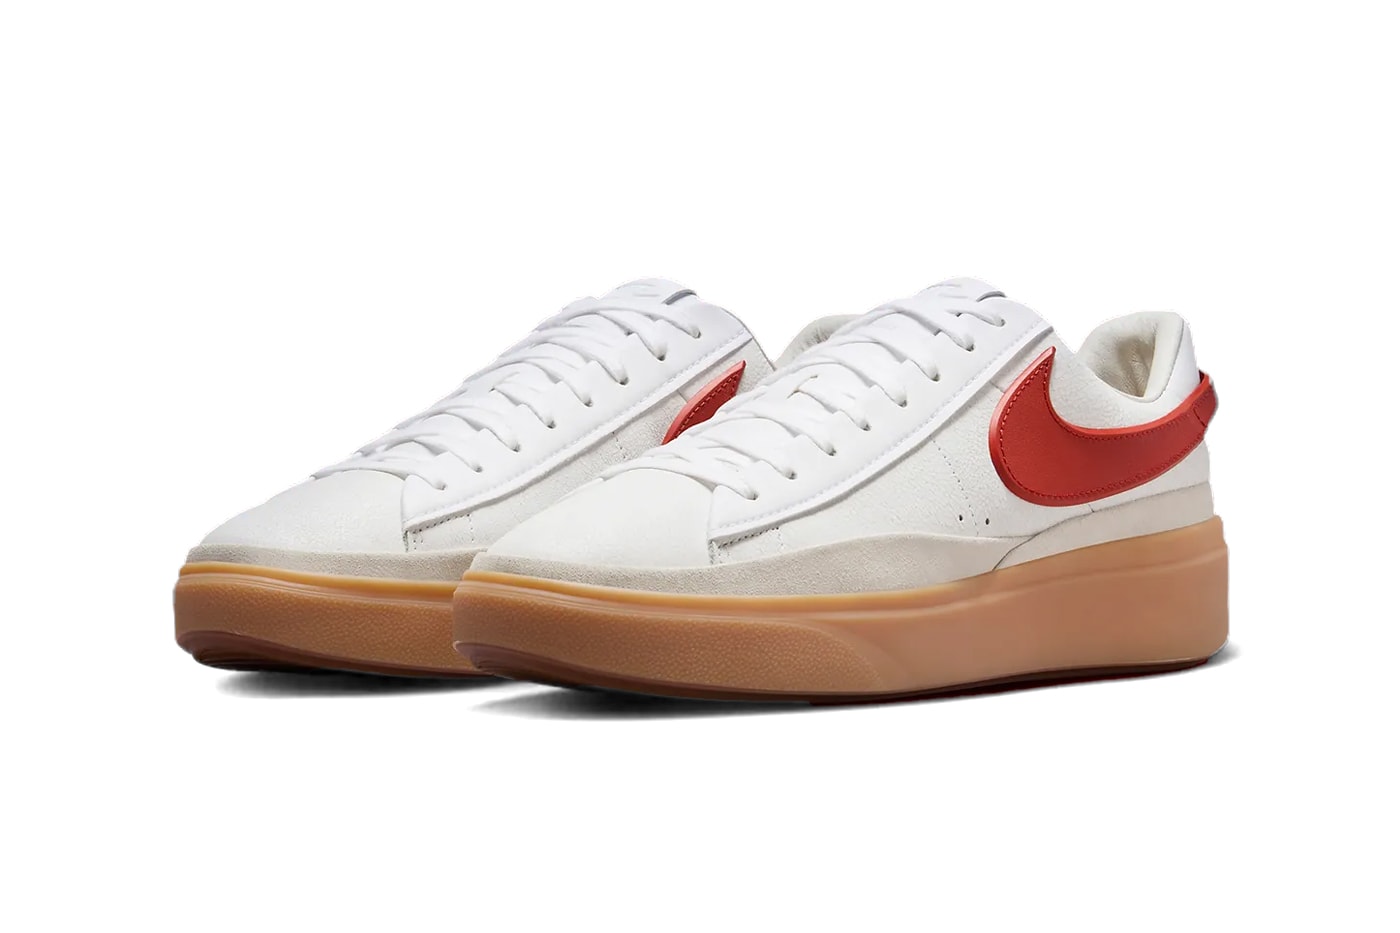 Official Look Nike Blazer Phantom Low in "White/Red" FN5820-100 goddess of victory low-top shoes hangtag sneakers